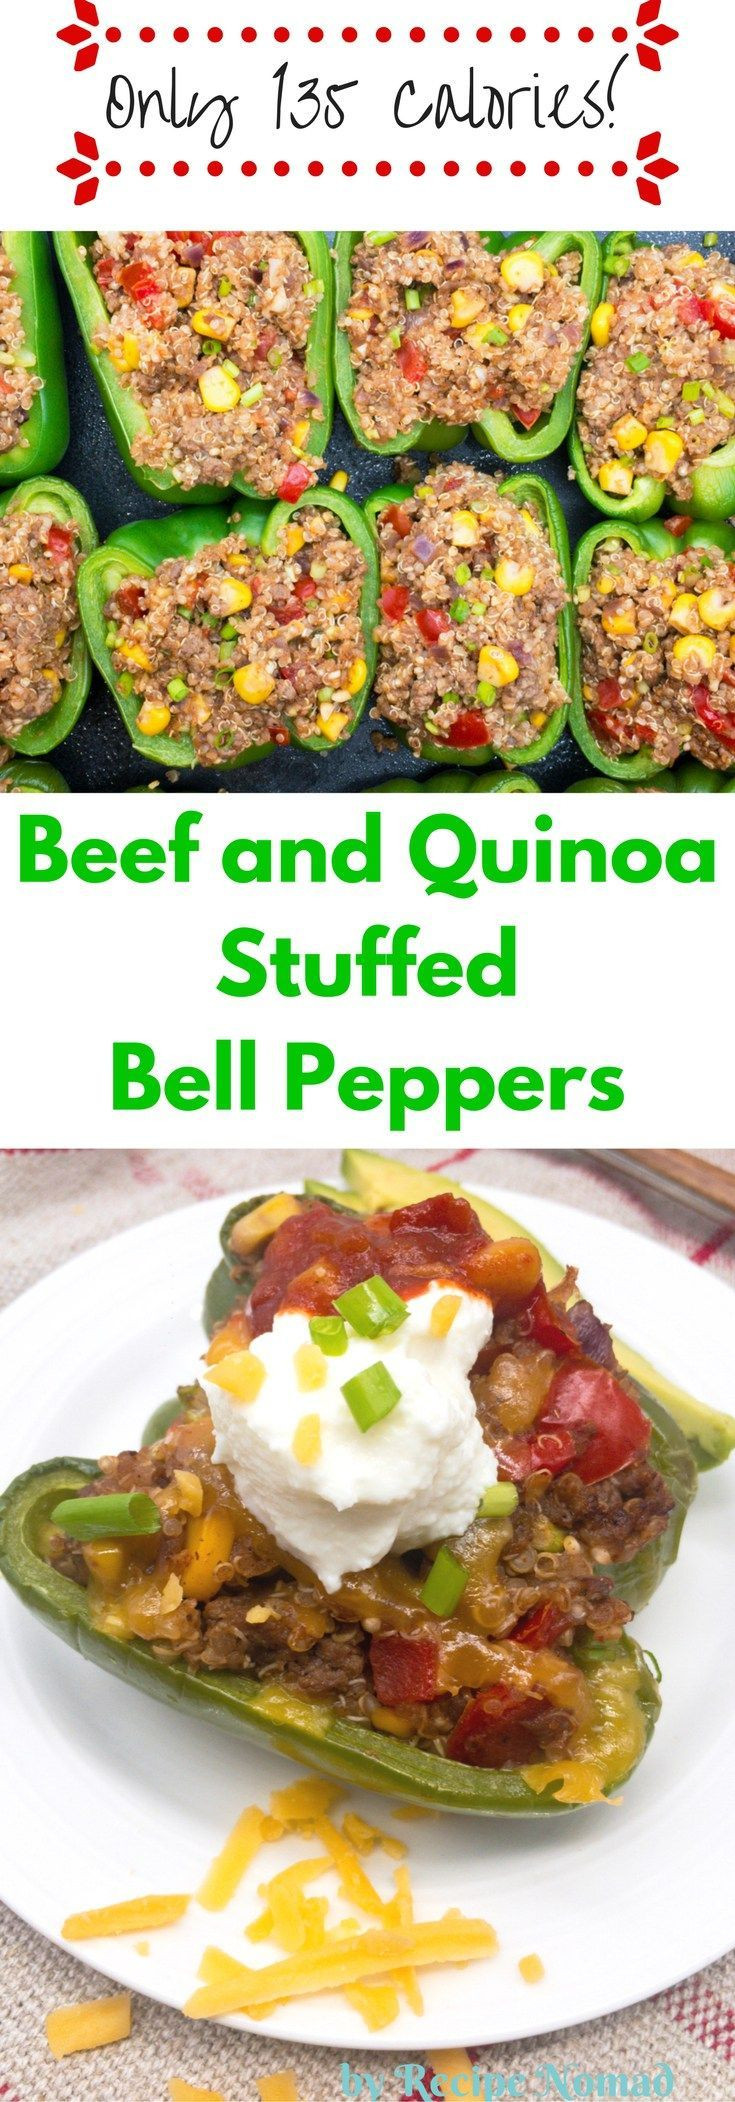 Low Calorie Stuffed Bell Peppers
 Low Calorie Beef Quinoa Stuffed Bell Peppers